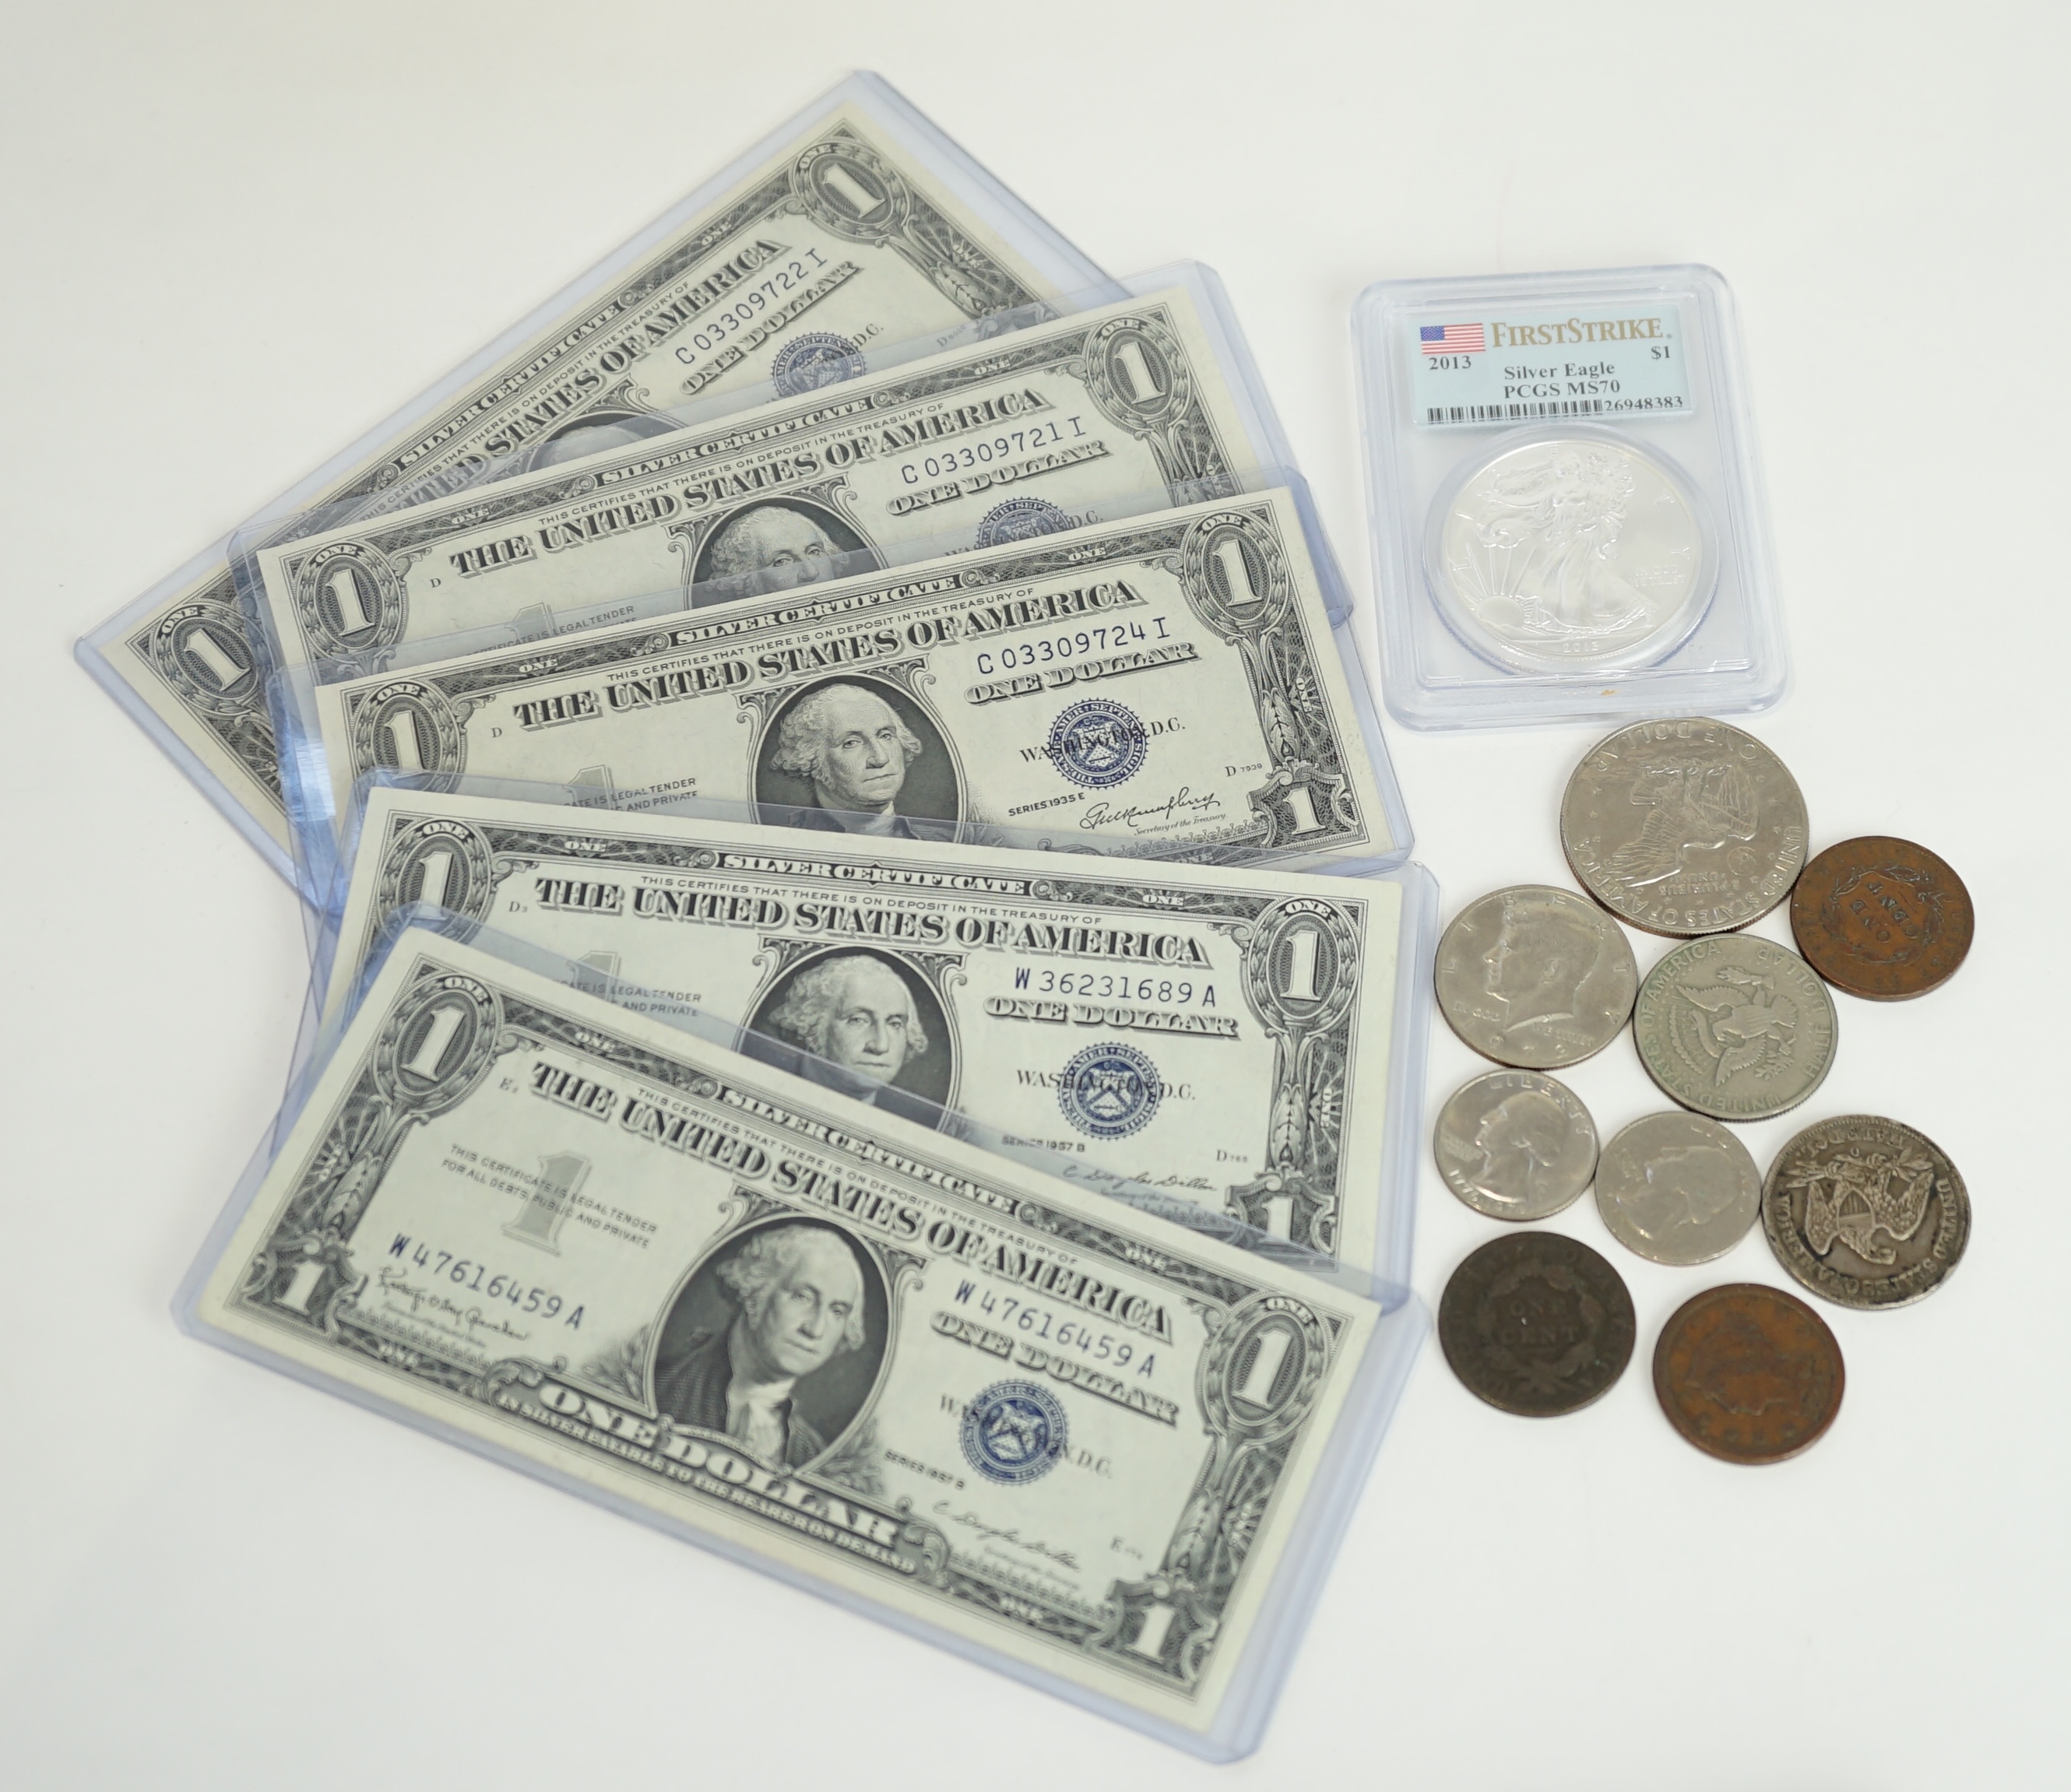 USA coins, to include silver eagle dollar 2013 in PCGS slab, 1858O half dollar, good VF, various dimes, half dimes, one cents together with five US silver certificate $1 notes banknotes (three series 1935E and two 1957B)